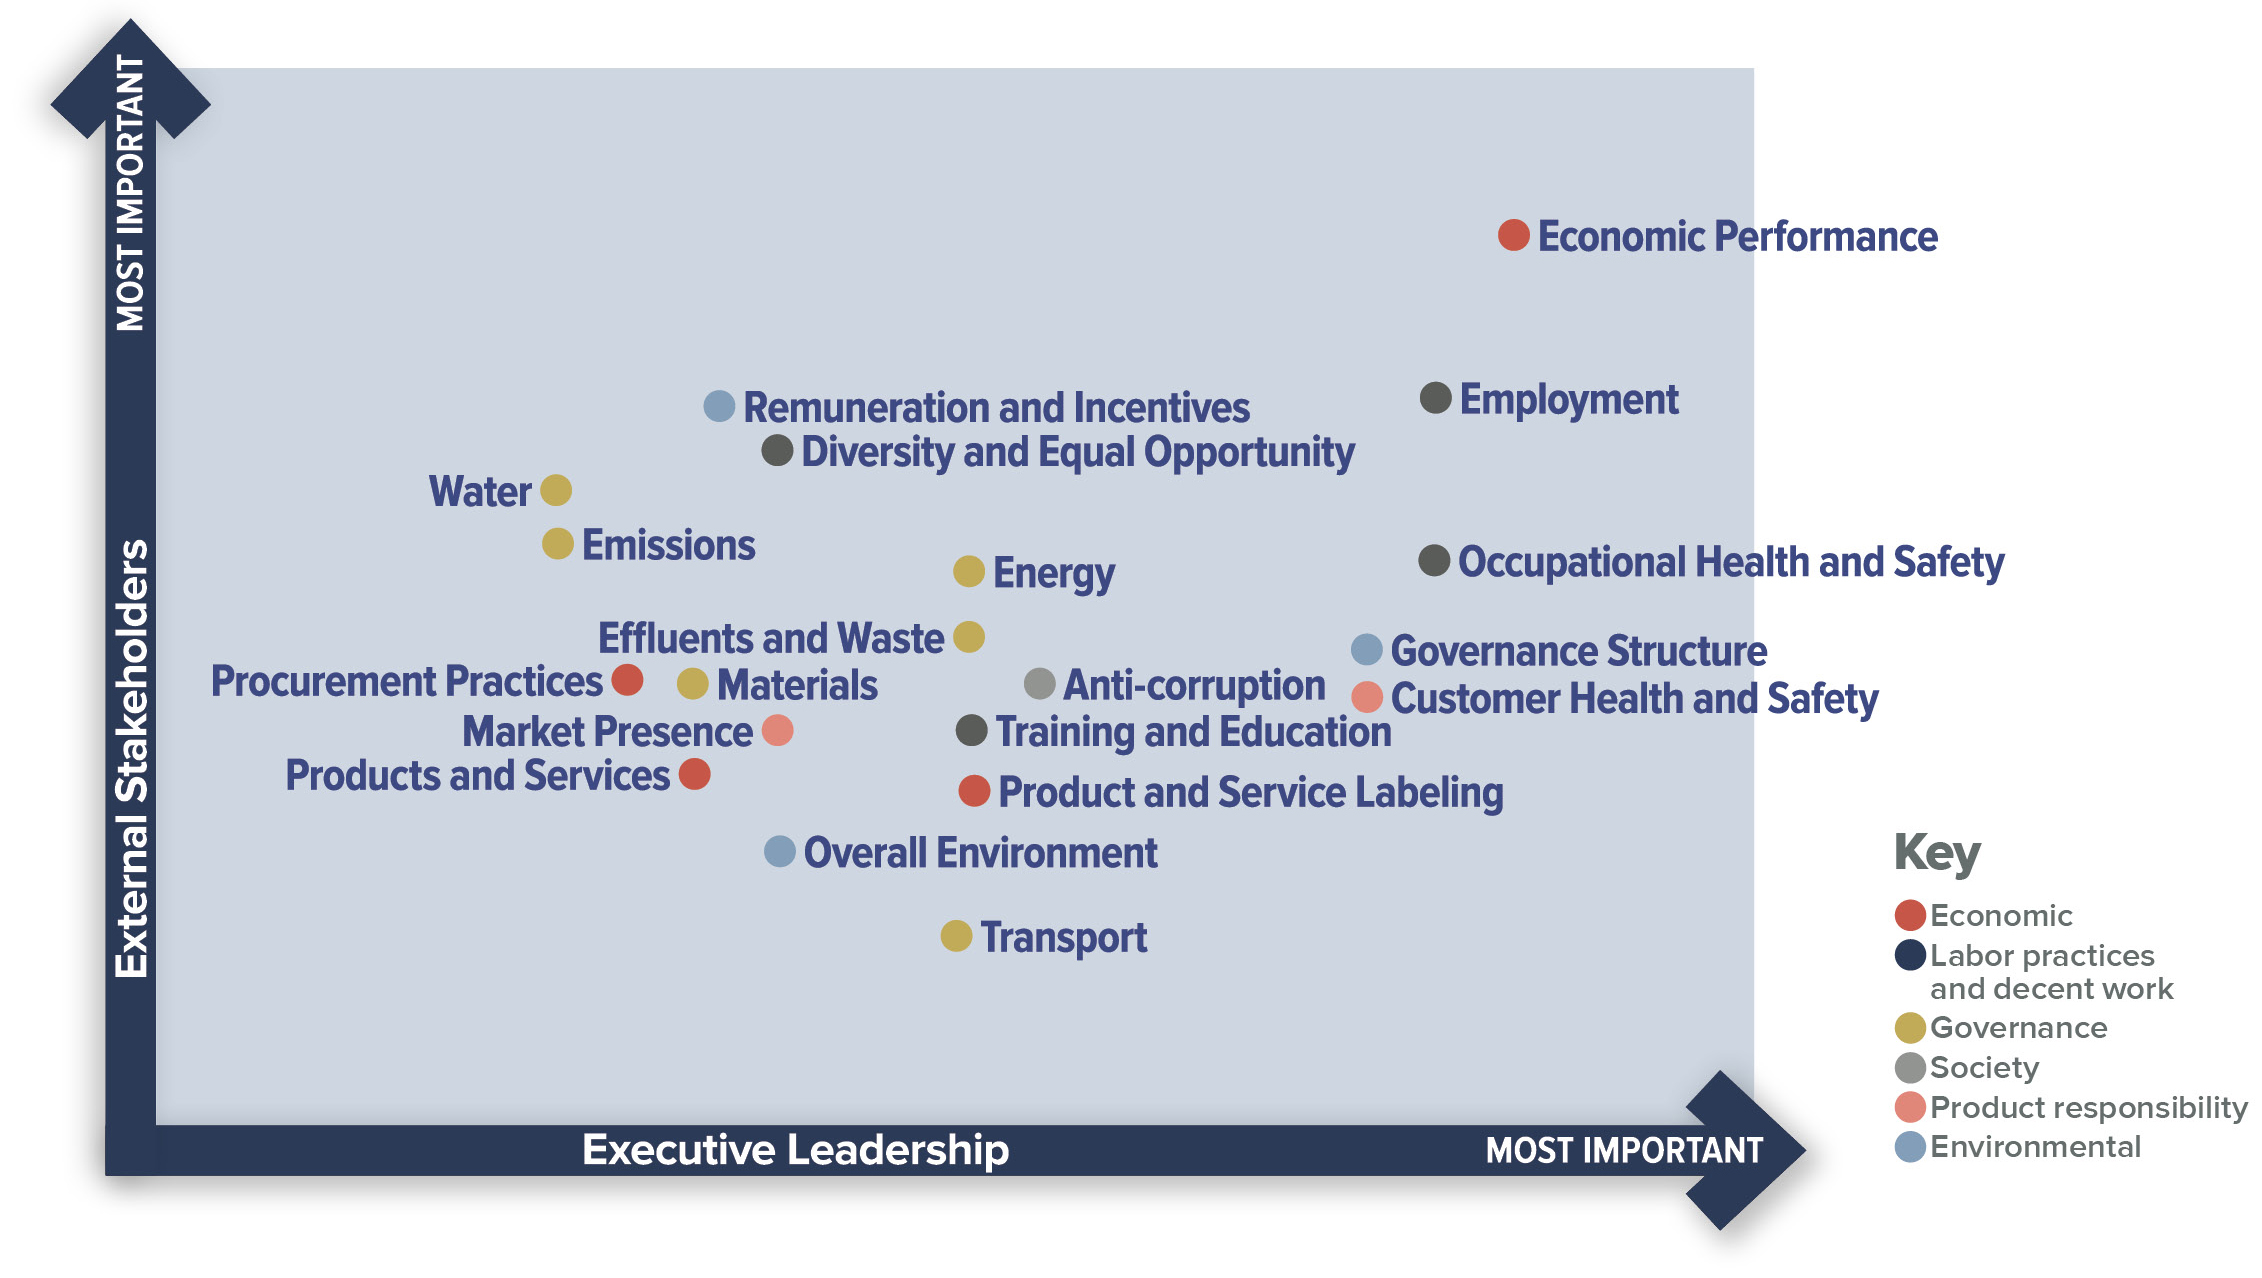 Blue materiality chart that charts significance of issues to both executive leadership and external stakeholders.